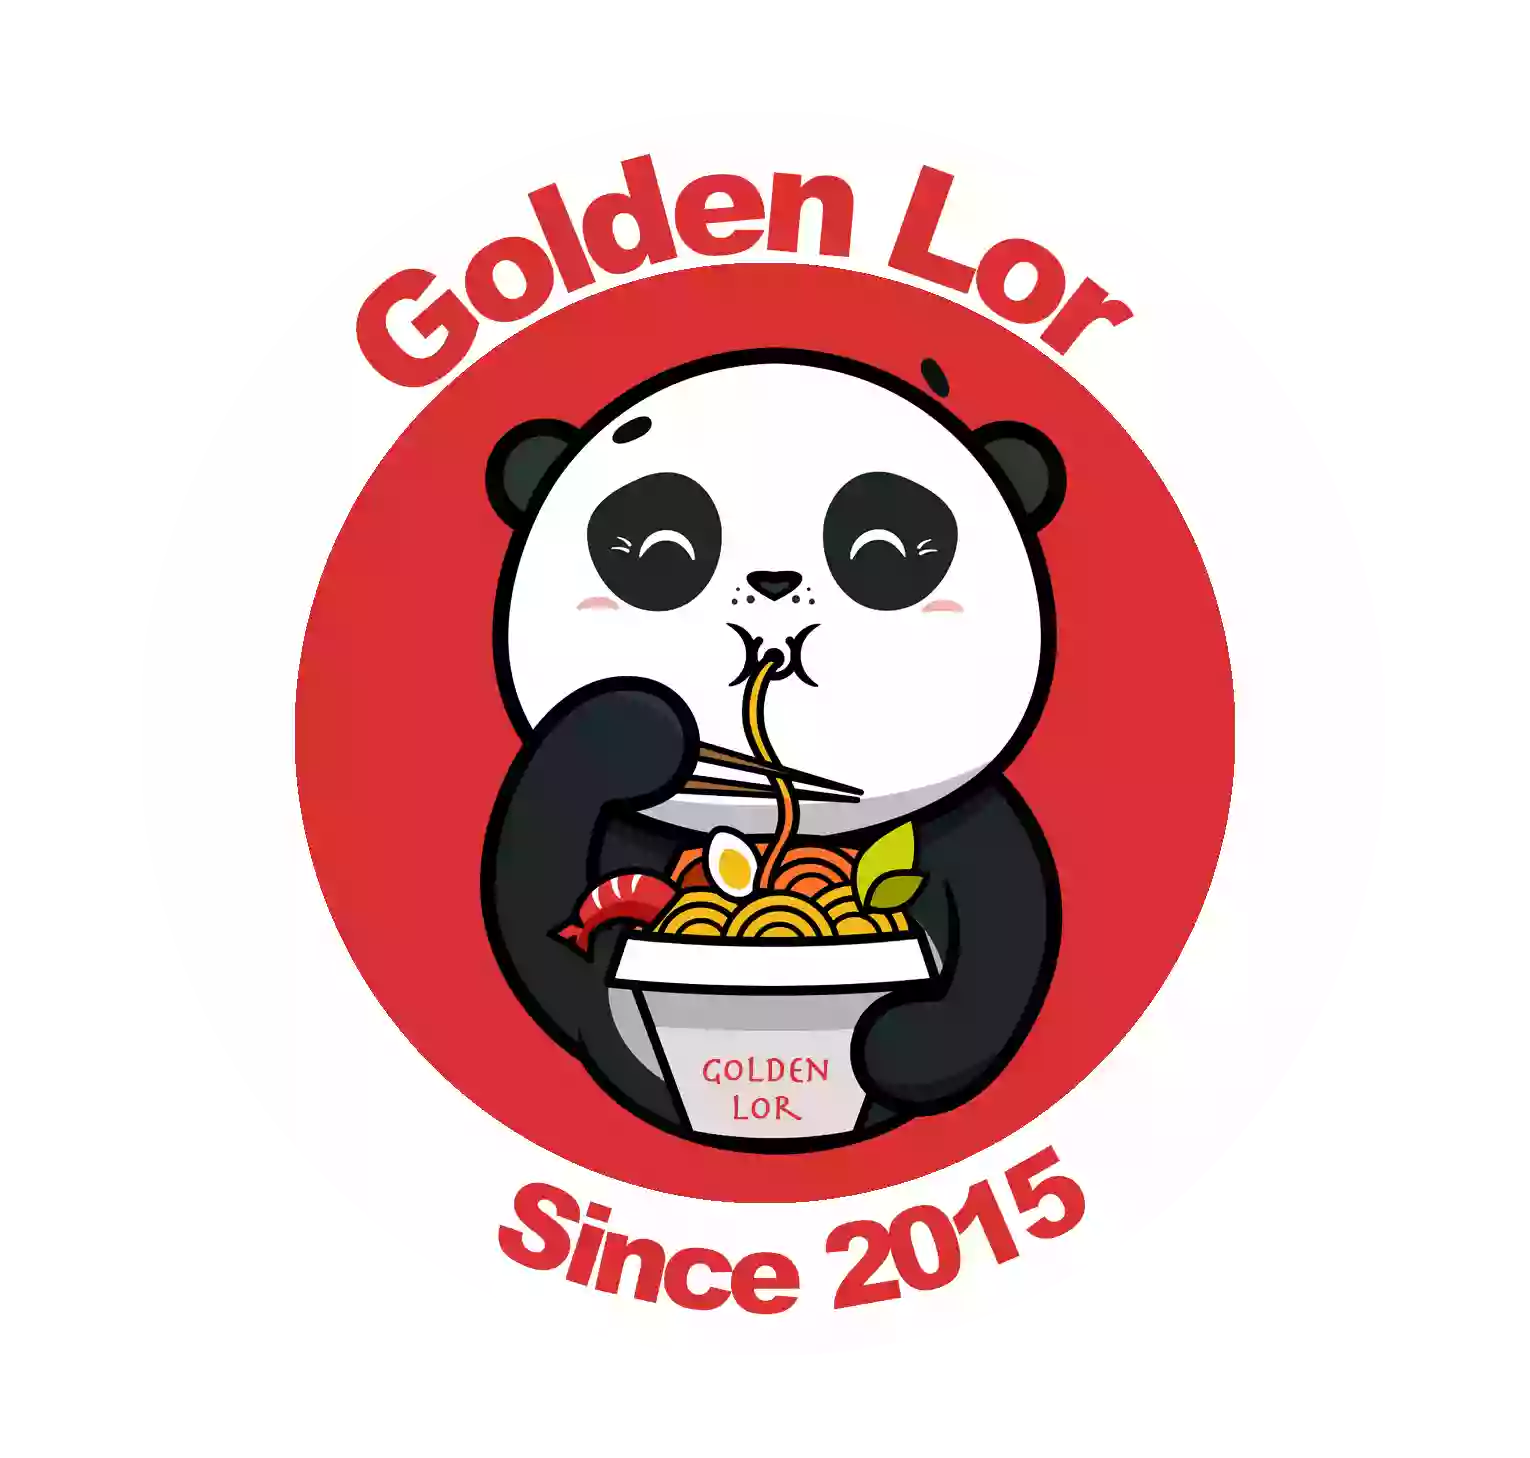 Golden Lor Ripley Chinese restaurant and takeaway